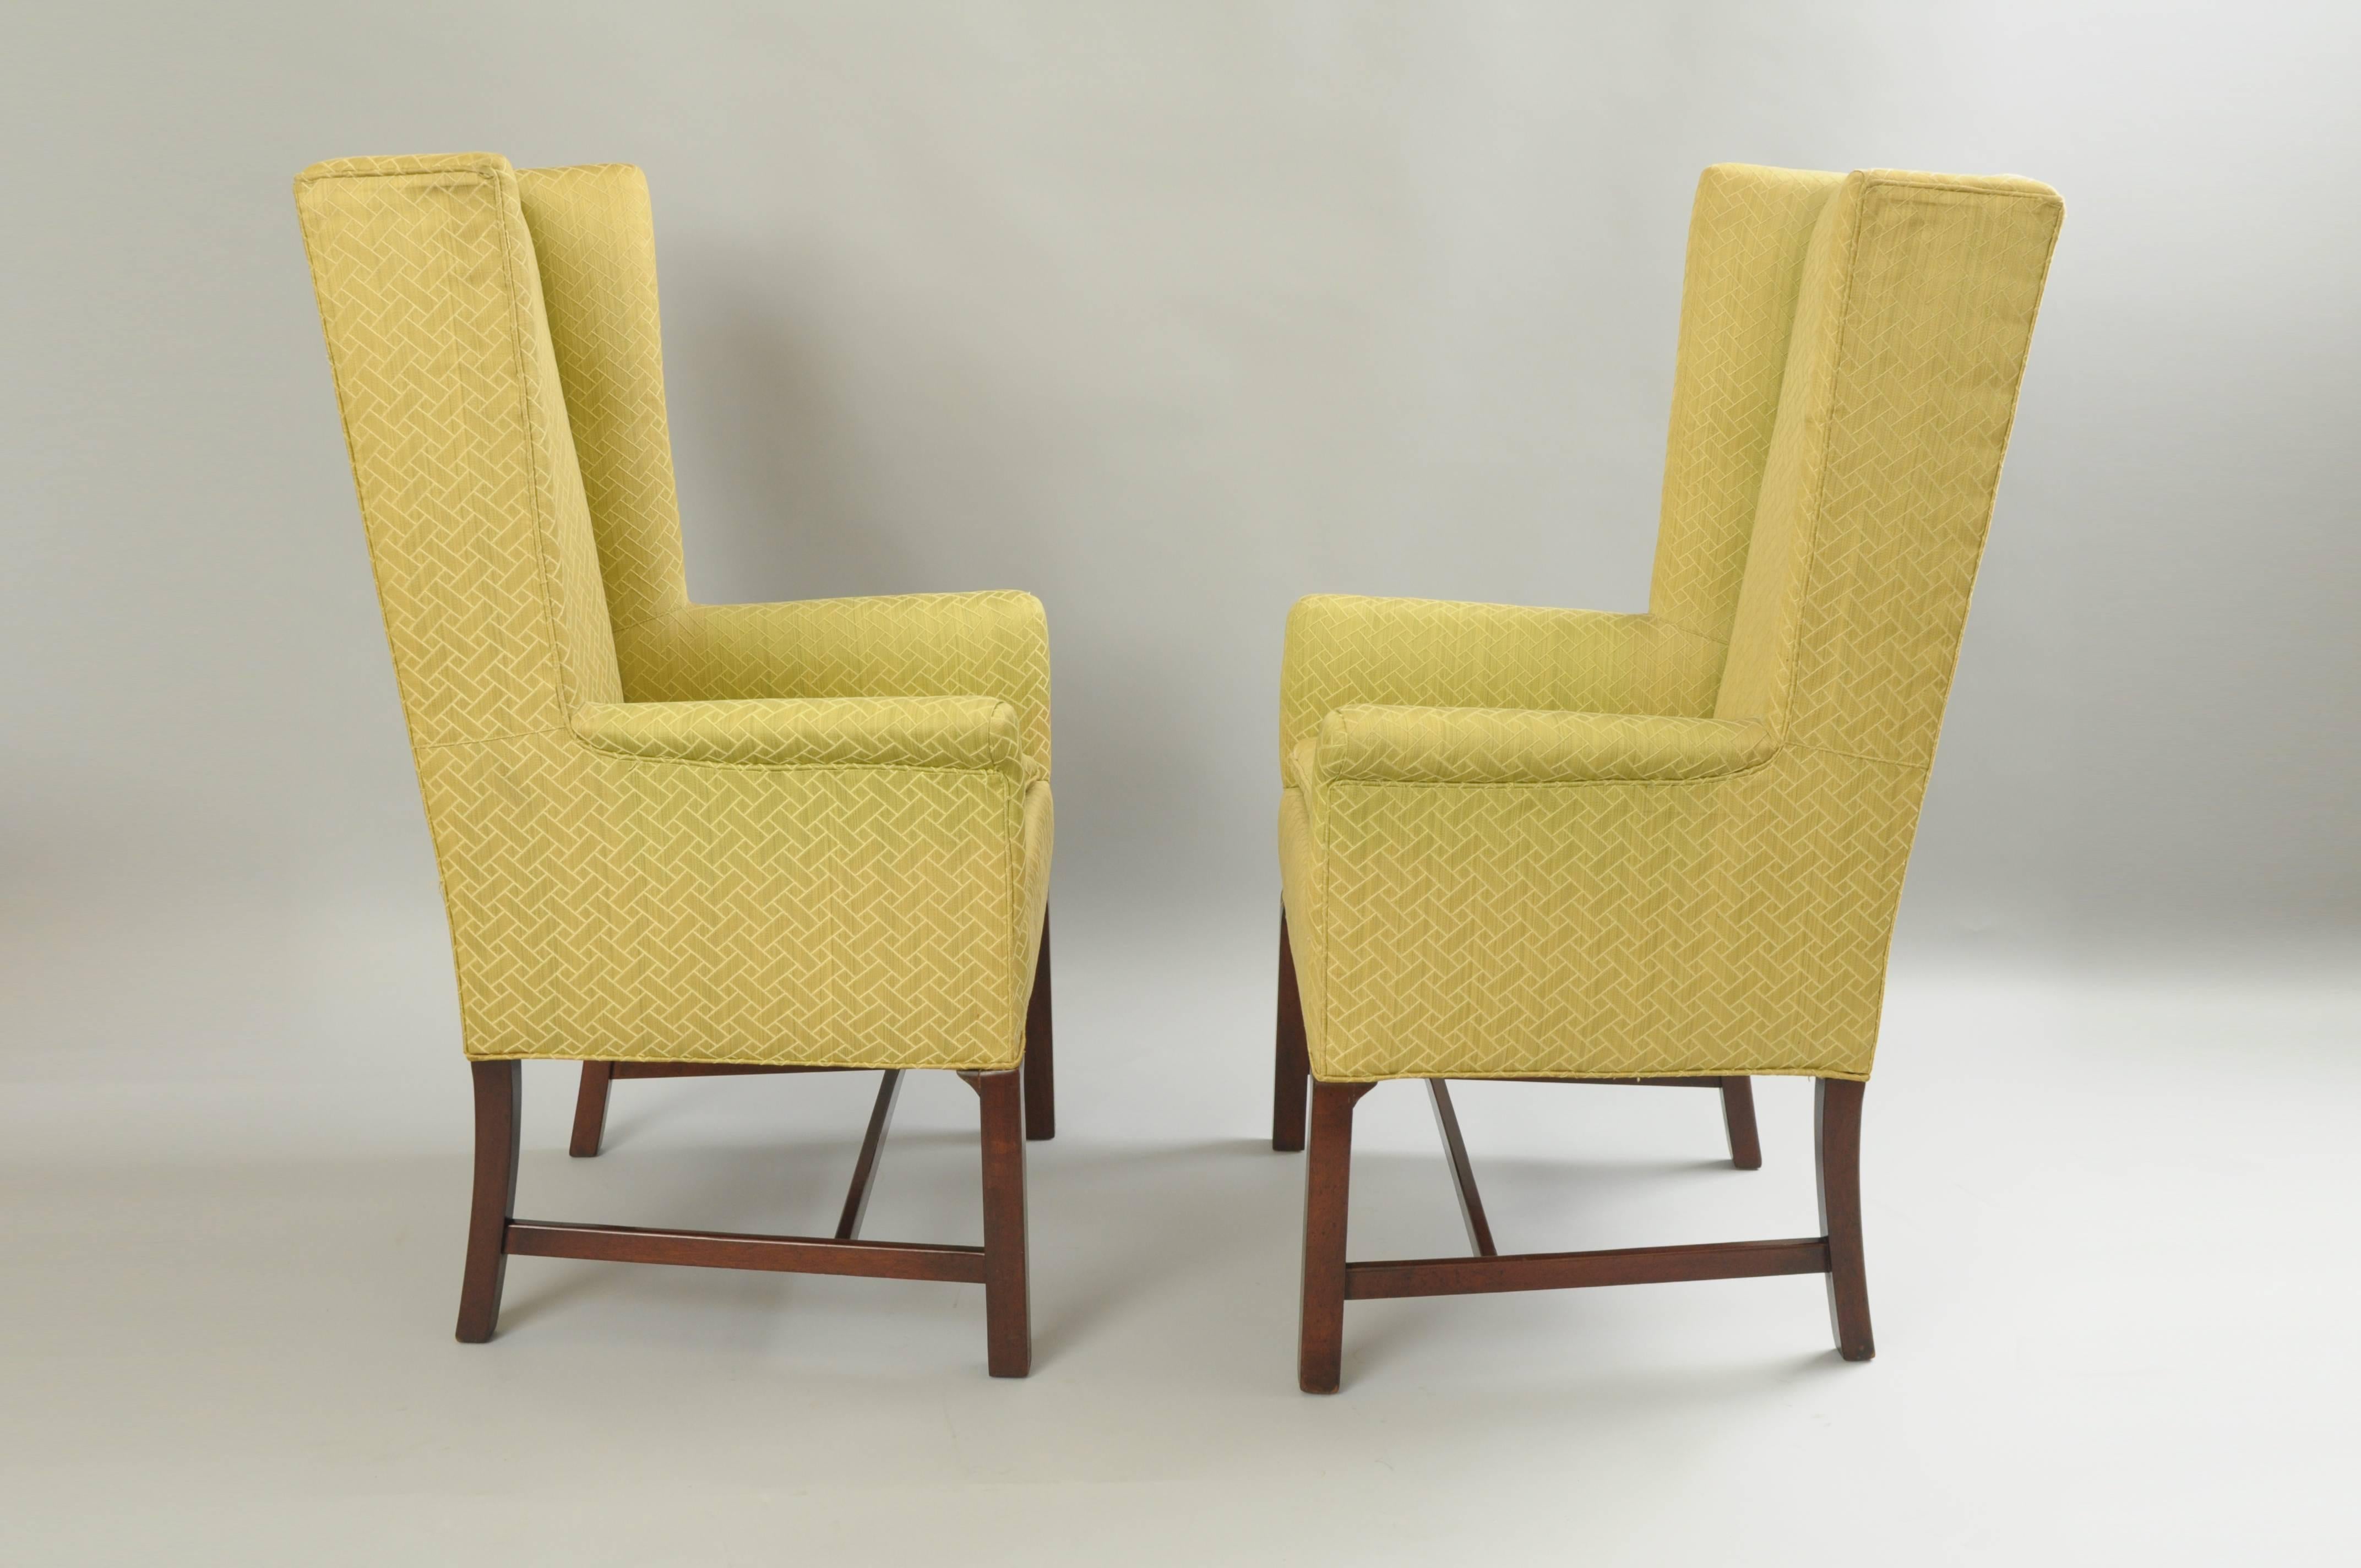 20th Century Pair of Mid-Century Modern Mahogany Wingback Lounge Chairs after Edward Wormley